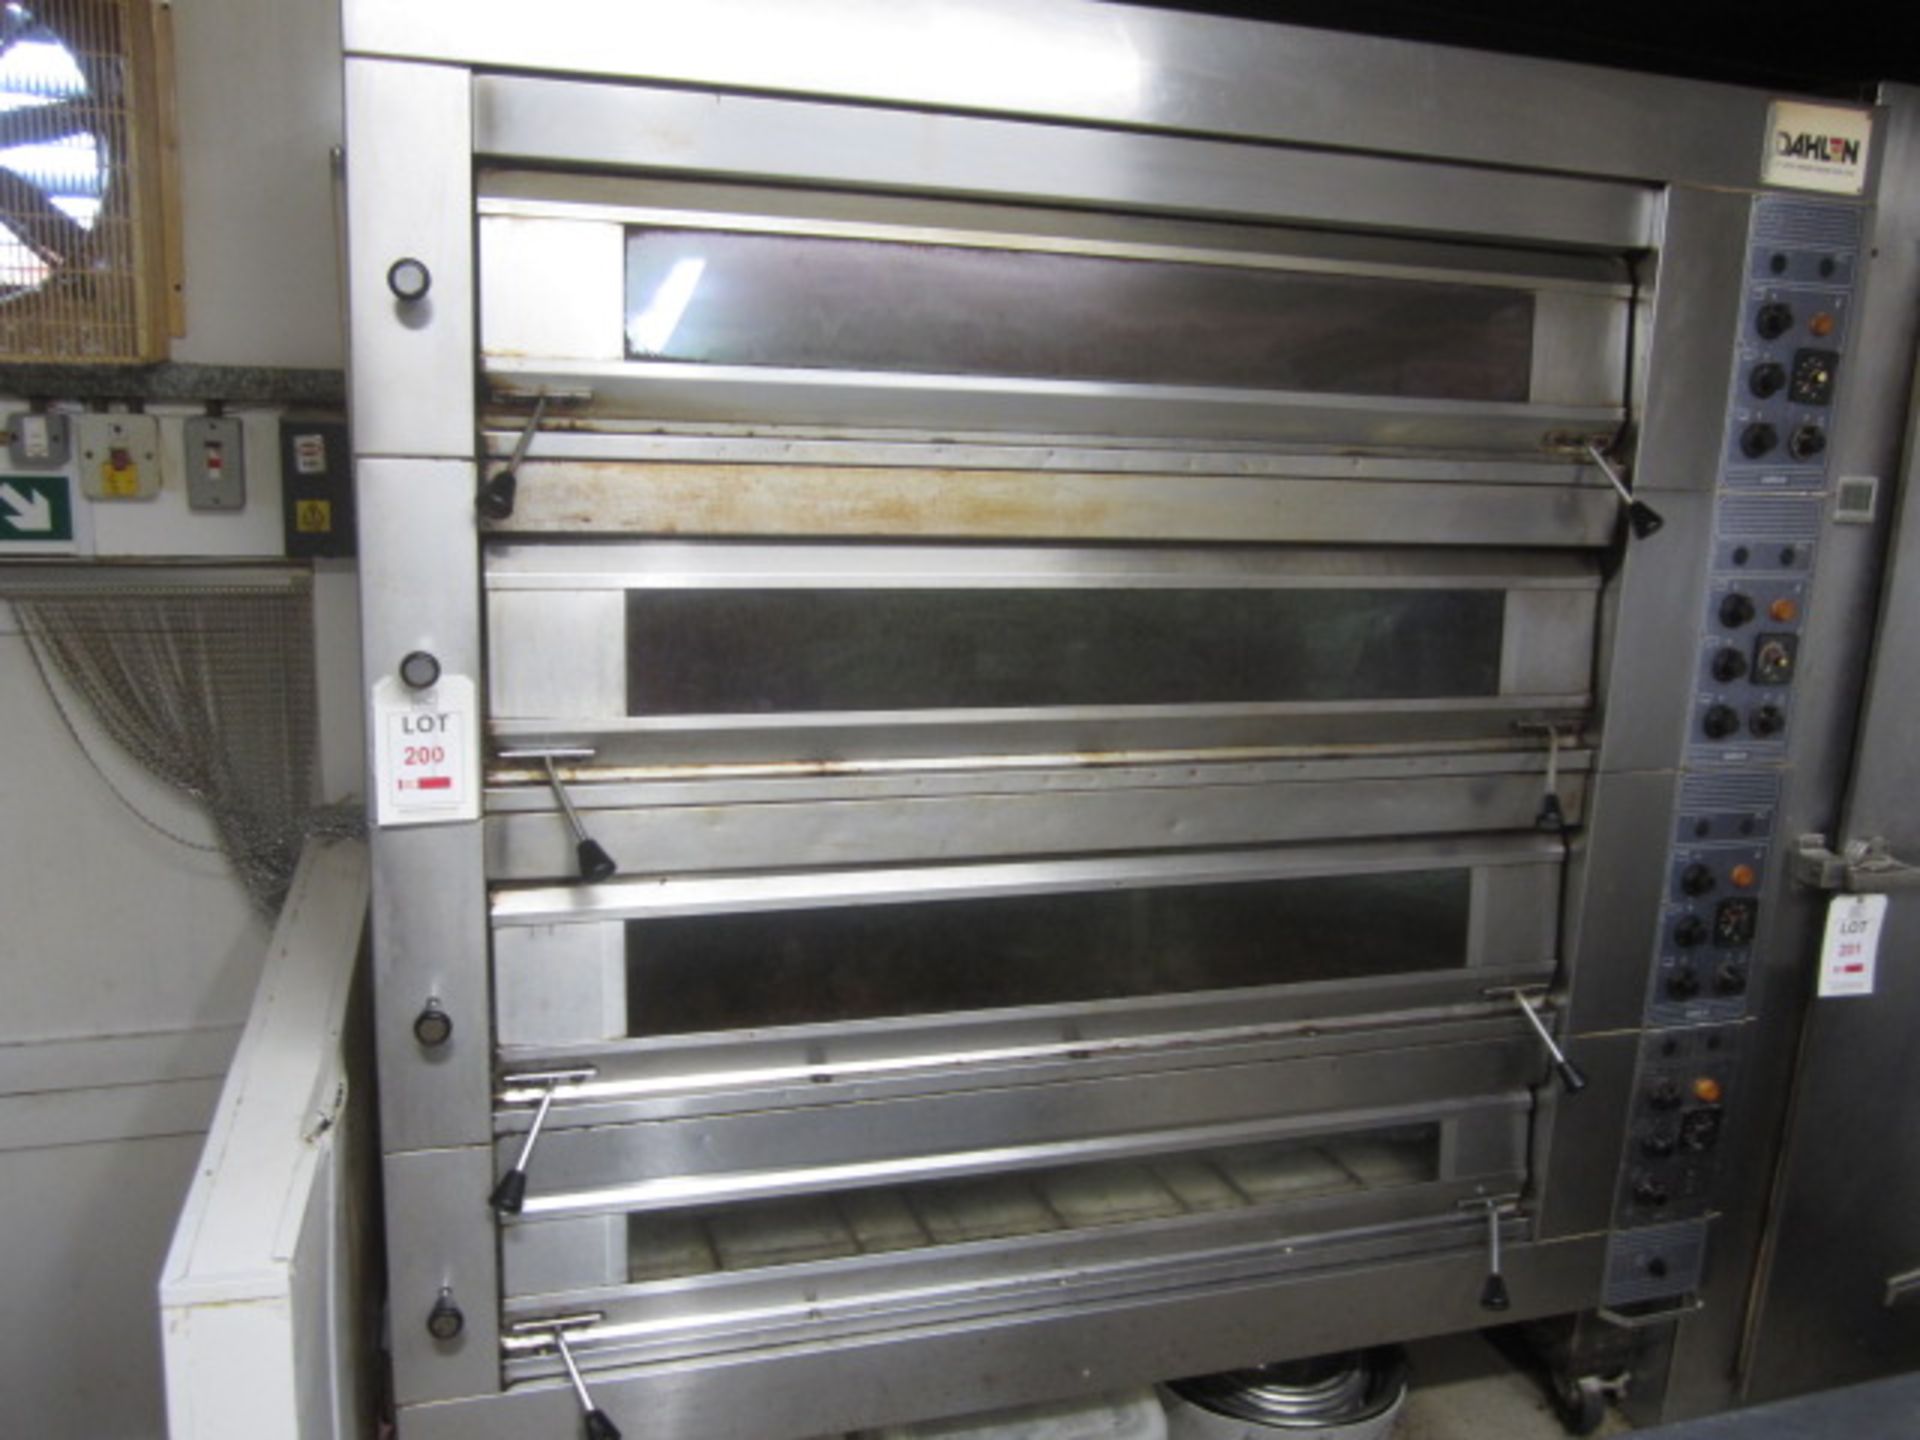 Dahlen stainless steel commercial 4 deck oven, 56" deck width, approx. overall size: 1950mm x 2010mm